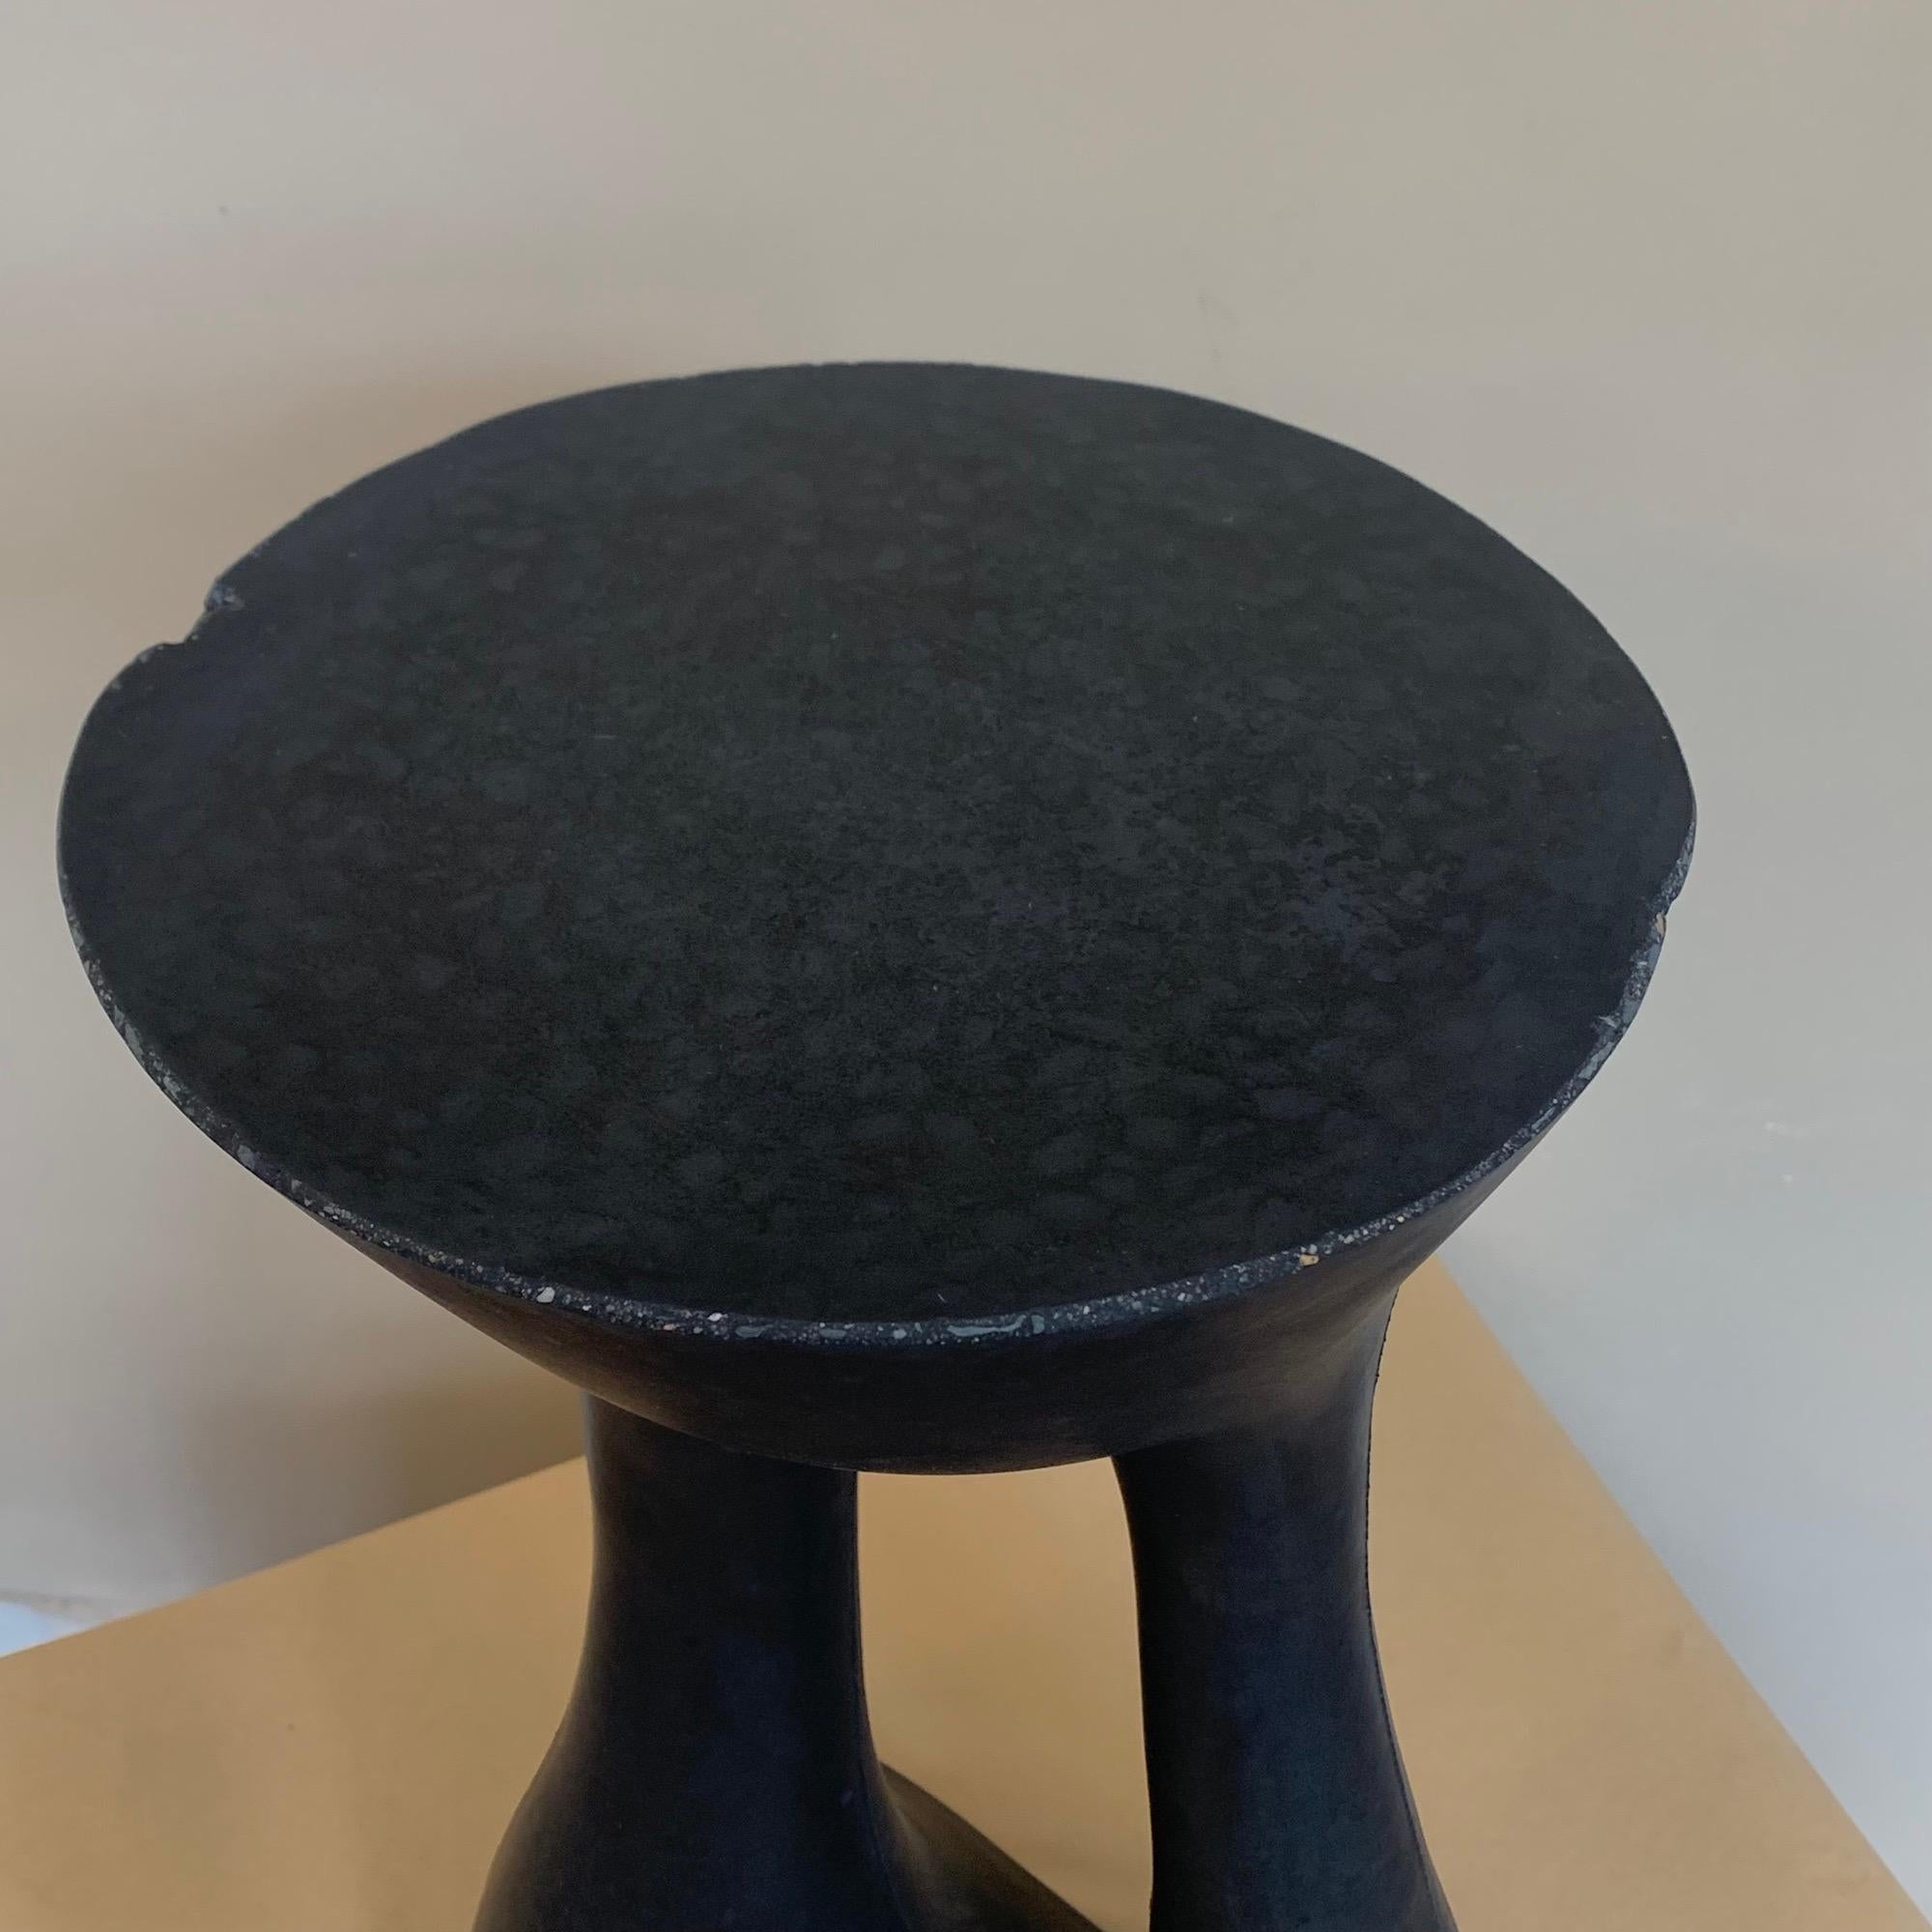 Contemporary Tall Black Kreten Side Table from Souda, Factory 2nd